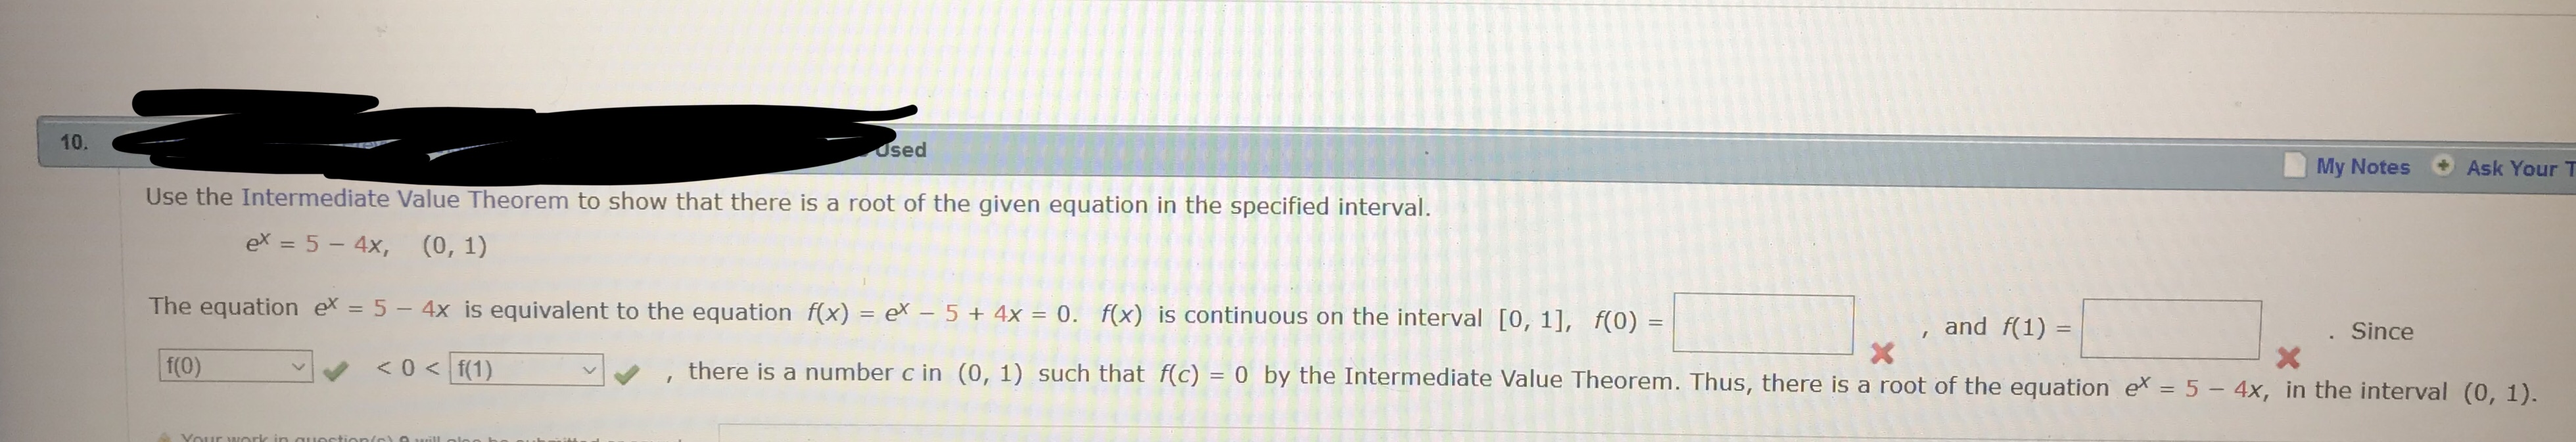 10
osed
My Notes
Ask Your T
Use the Intermediate Value Theorem to show that there is a root of the given equation in the specified interval
ex = 5-4),
(0,1)
The equation ex-5- 4x is equivalent to the equation f(x) ex 5
4x 0fx) is continuous on the interval [0, 11, f(0)
, and f(1)-
Since
v,
, there is a number c in (0, 1) such that f(c)-0 by the Intermediate Value Theorem. Thus, there is a root of the
